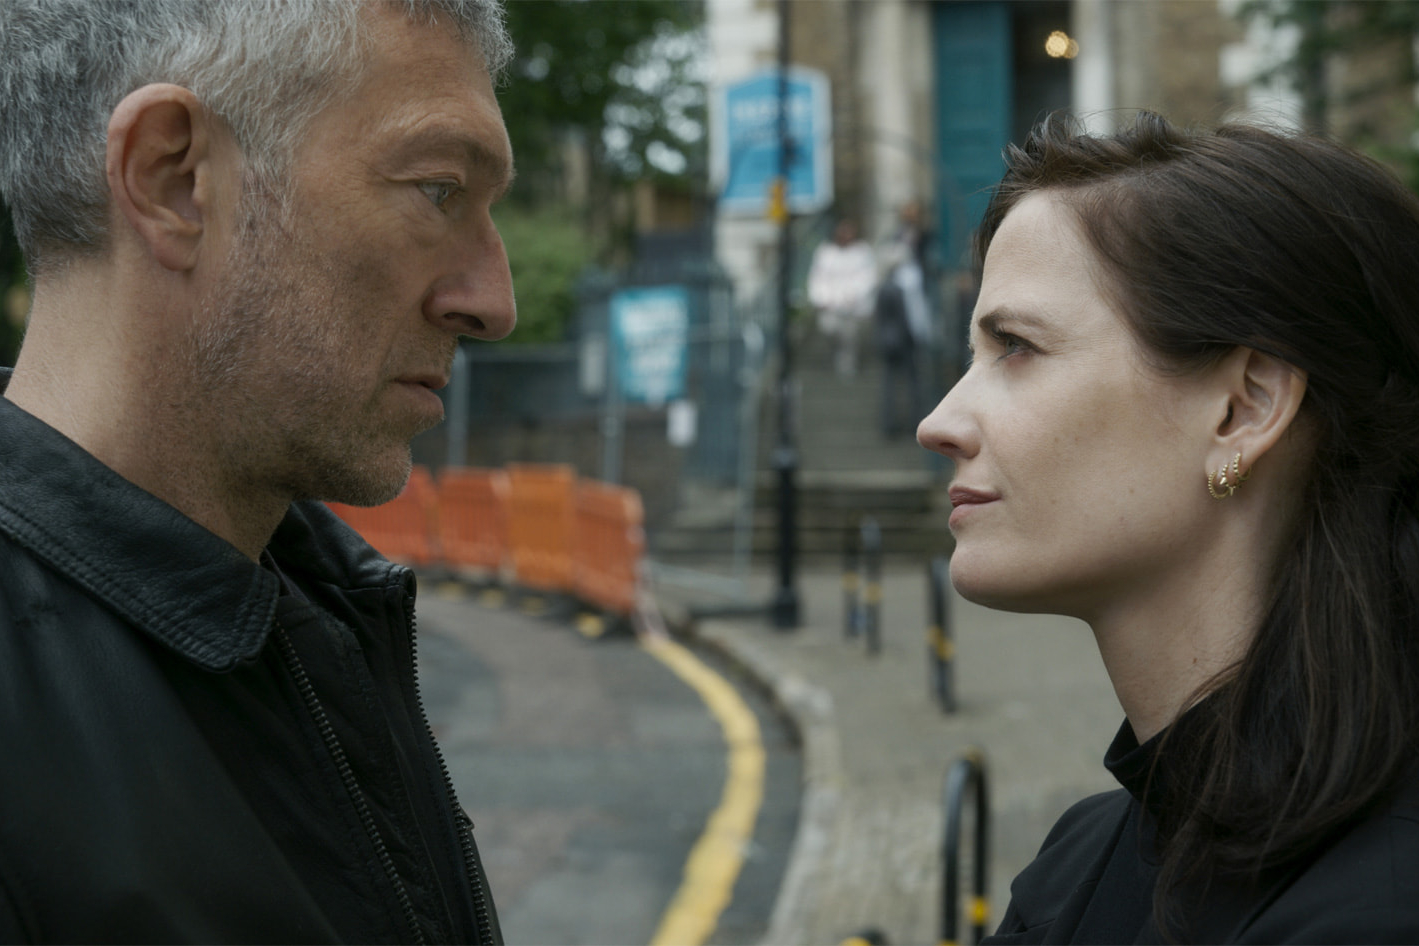 Vincent Cassel and Eva Green face each other in Liaison.